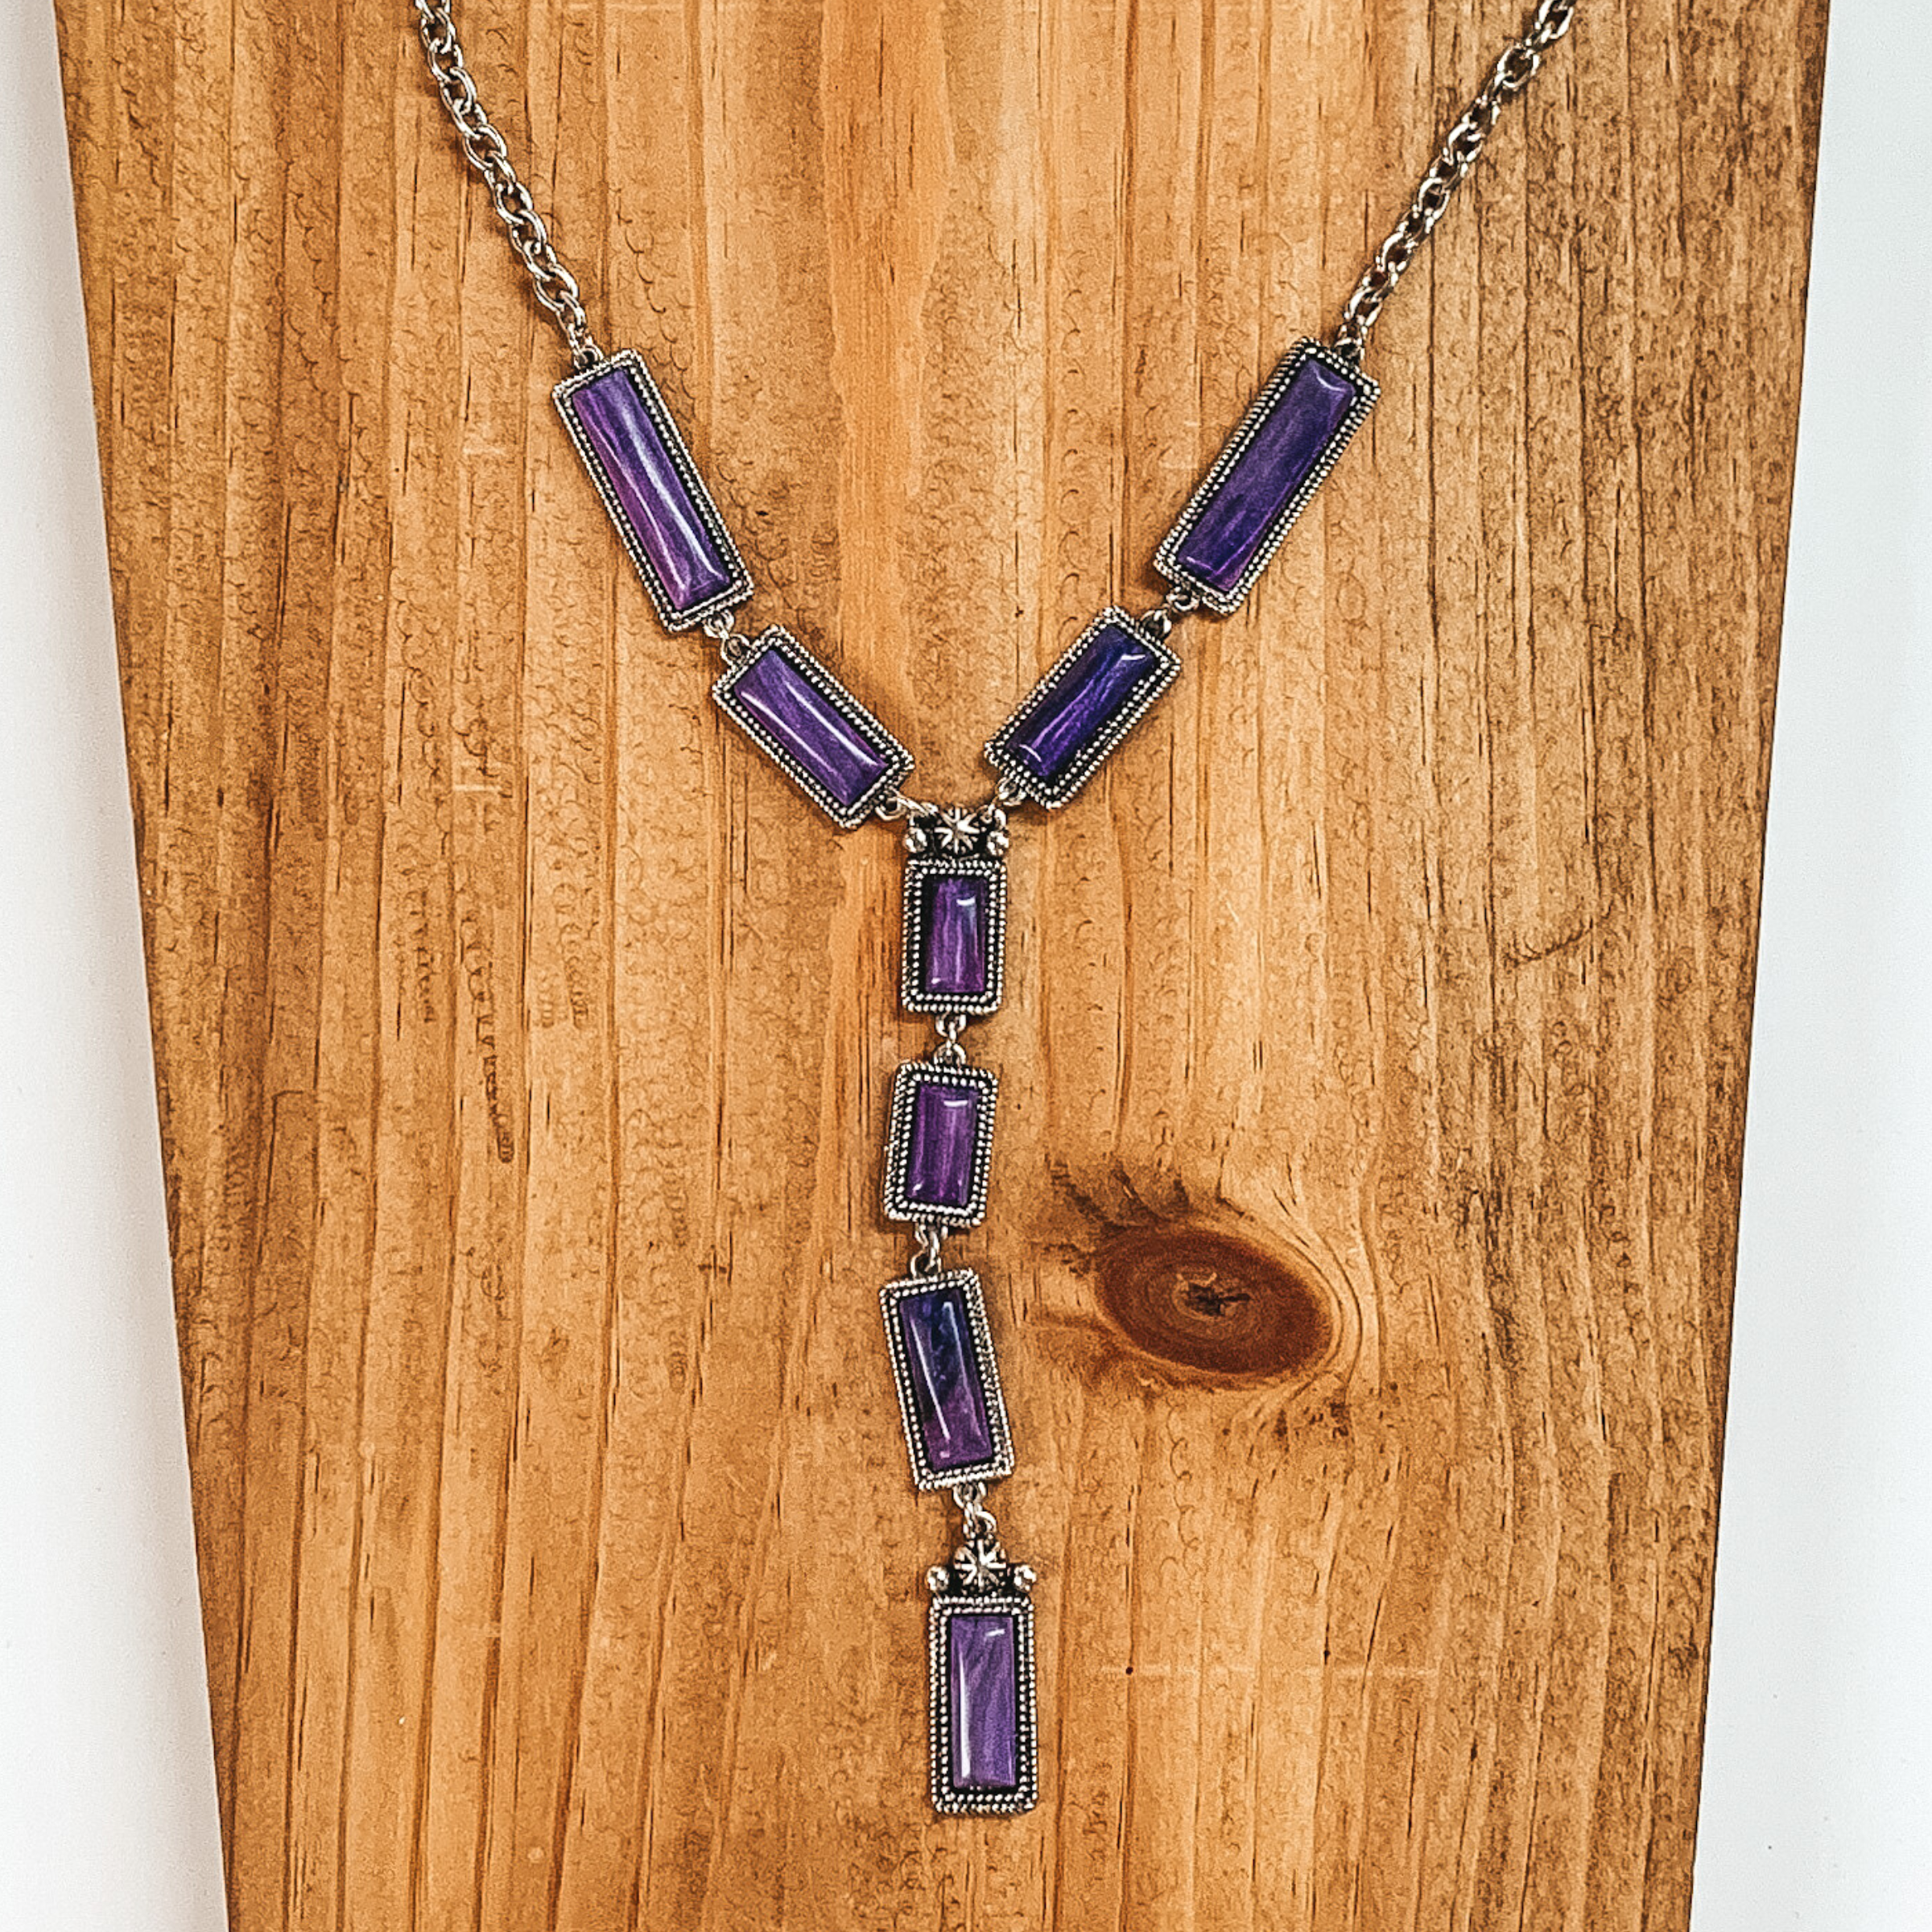 Silver Tone Lariat Necklace with Faux Purple Stones - Giddy Up Glamour Boutique